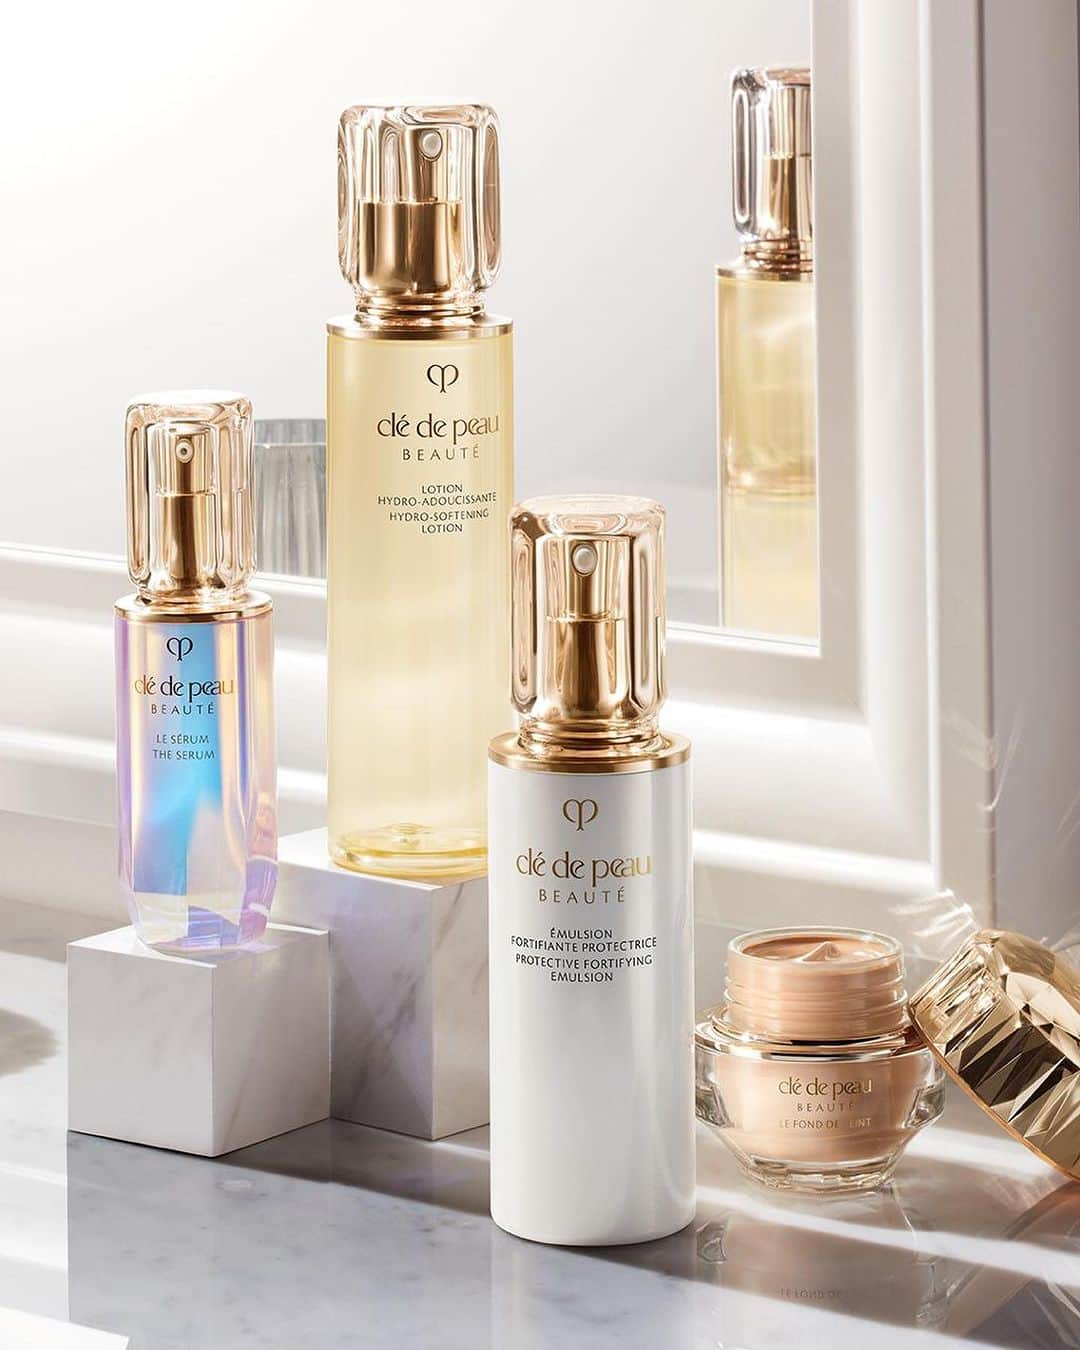 Clé de Peau Beauté Officialさんのインスタグラム写真 - (Clé de Peau Beauté OfficialInstagram)「Preparing your skin before applying makeup is just as important as creating a smooth base with #TheFoundation.  Start your day with the #KeyRadianceCare routine before you apply The Foundation. In the evenings, be sure to cleanse thoroughly with the #CleansingOil to dissolve impurities and makeup. Follow up by washing your face with the #SofteningCleansingFoam, which is enriched with amino acids to gently cleanse your face and leave your skin deeply nourished and moisturized.   クレ・ド・ポー ボーテ #ルフォンドゥタンｎ でハリのある輝きと立体感のある顔立ちを演出するには、メイク前のお肌の準備も重要です。  ル・フォンドゥタンｎを塗る前に、 #キーラディアンスケア の習慣で１日をスタートさせましょう。 夜は、クレ・ド・ポー ボーテ #ユイルデマキアントヴィサージュ でしっかりクレンジングし、ウォータープルーフのメイクアップや毛穴の汚れまでしっかりと取り除きます。 その後、うるおい成分*や天然由来のアミノ酸を含んだ、吸いつくように濃密な泡が肌を優雅に包み込み、しっとりとした肌に洗い上げる洗顔フォーム、クレ・ド・ポー ボーテ #ムースネトワイアントＡｎ で洗い上げましょう。  *W ヒアルロン酸（ヒアルロン酸 Na、アセチルヒアルロン酸 Na)」10月18日 13時00分 - cledepeaubeaute